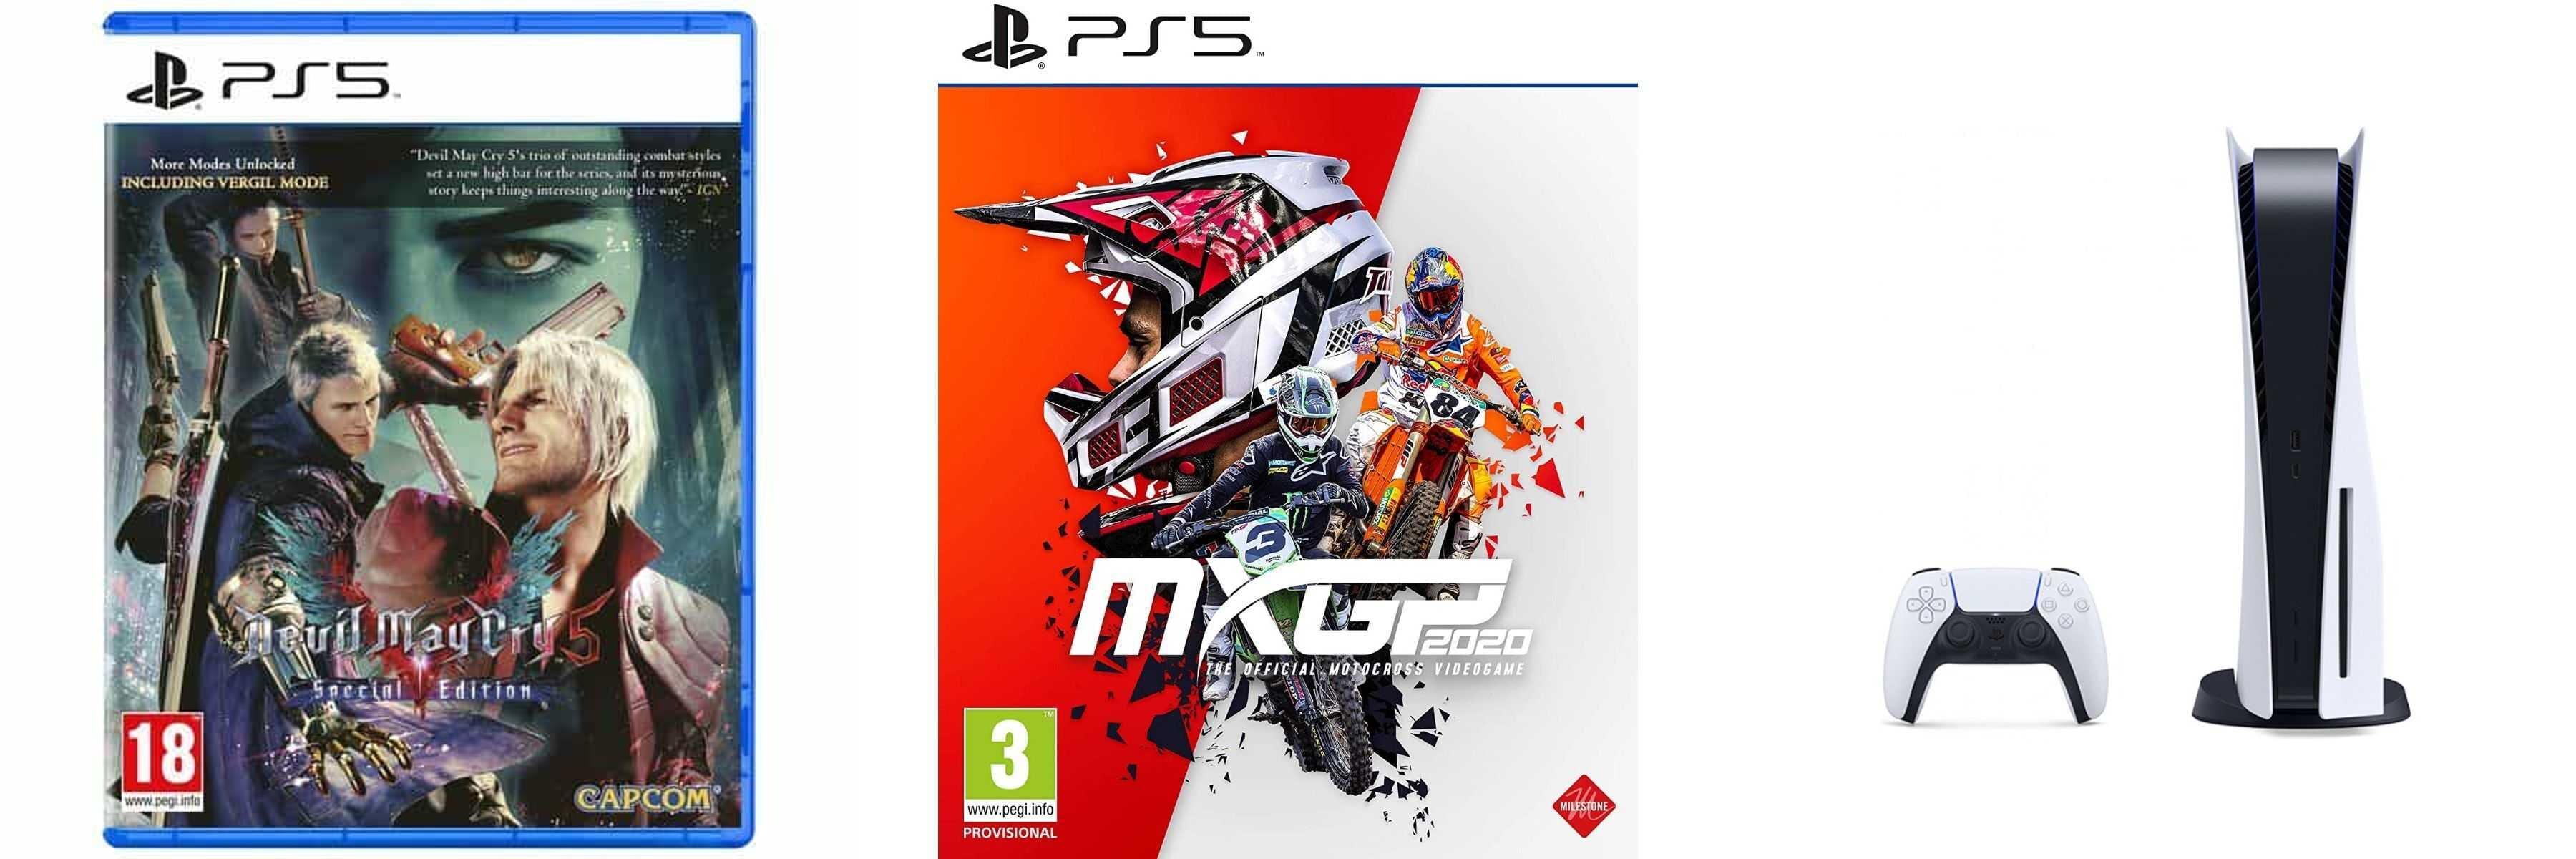 Sony PlayStation 5, 1 Wireless Controller, White - CFI-1016A01 MEE, with Devil May Cry 5 Special Edition, and MXGP 2020 The Official Motocross Videogame for PlayStation 5